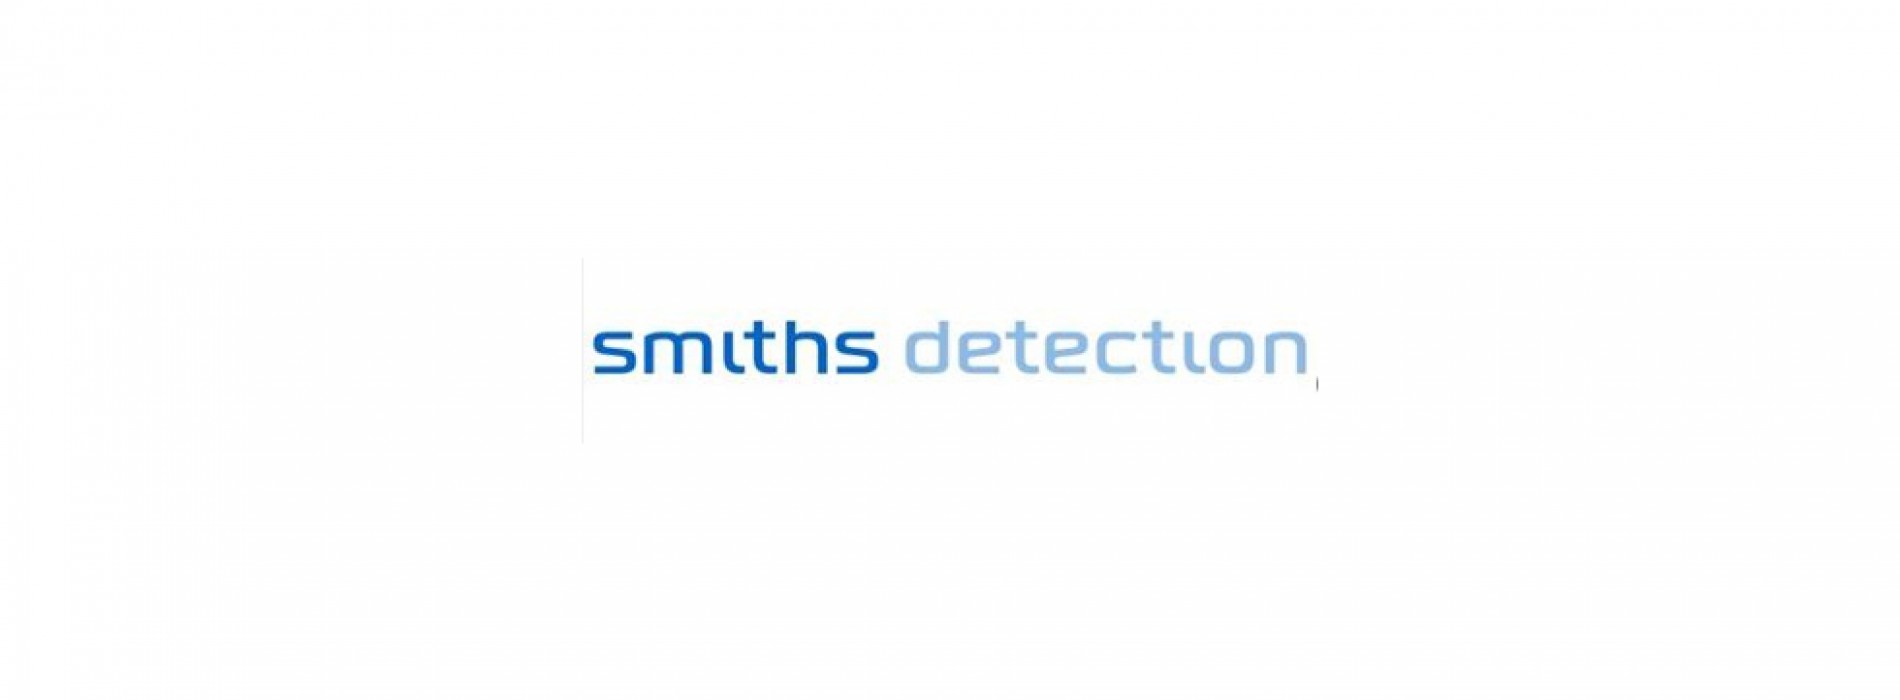 Smiths Detection launches new website in China